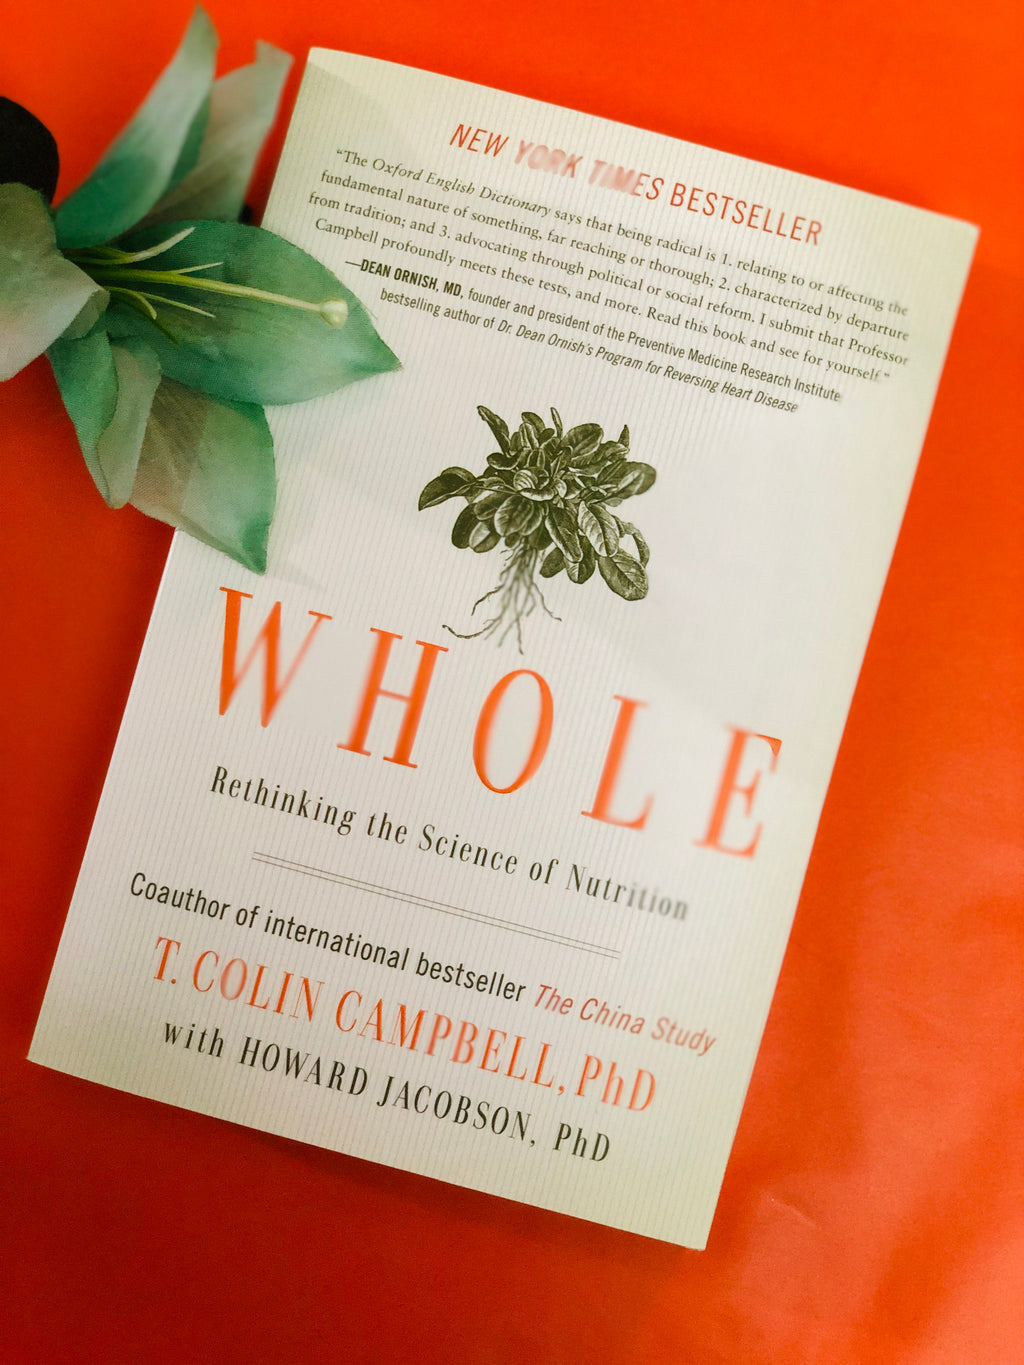 Whole: Rethinking the Science of Nutrition- By T. Colin Campbell, PhD